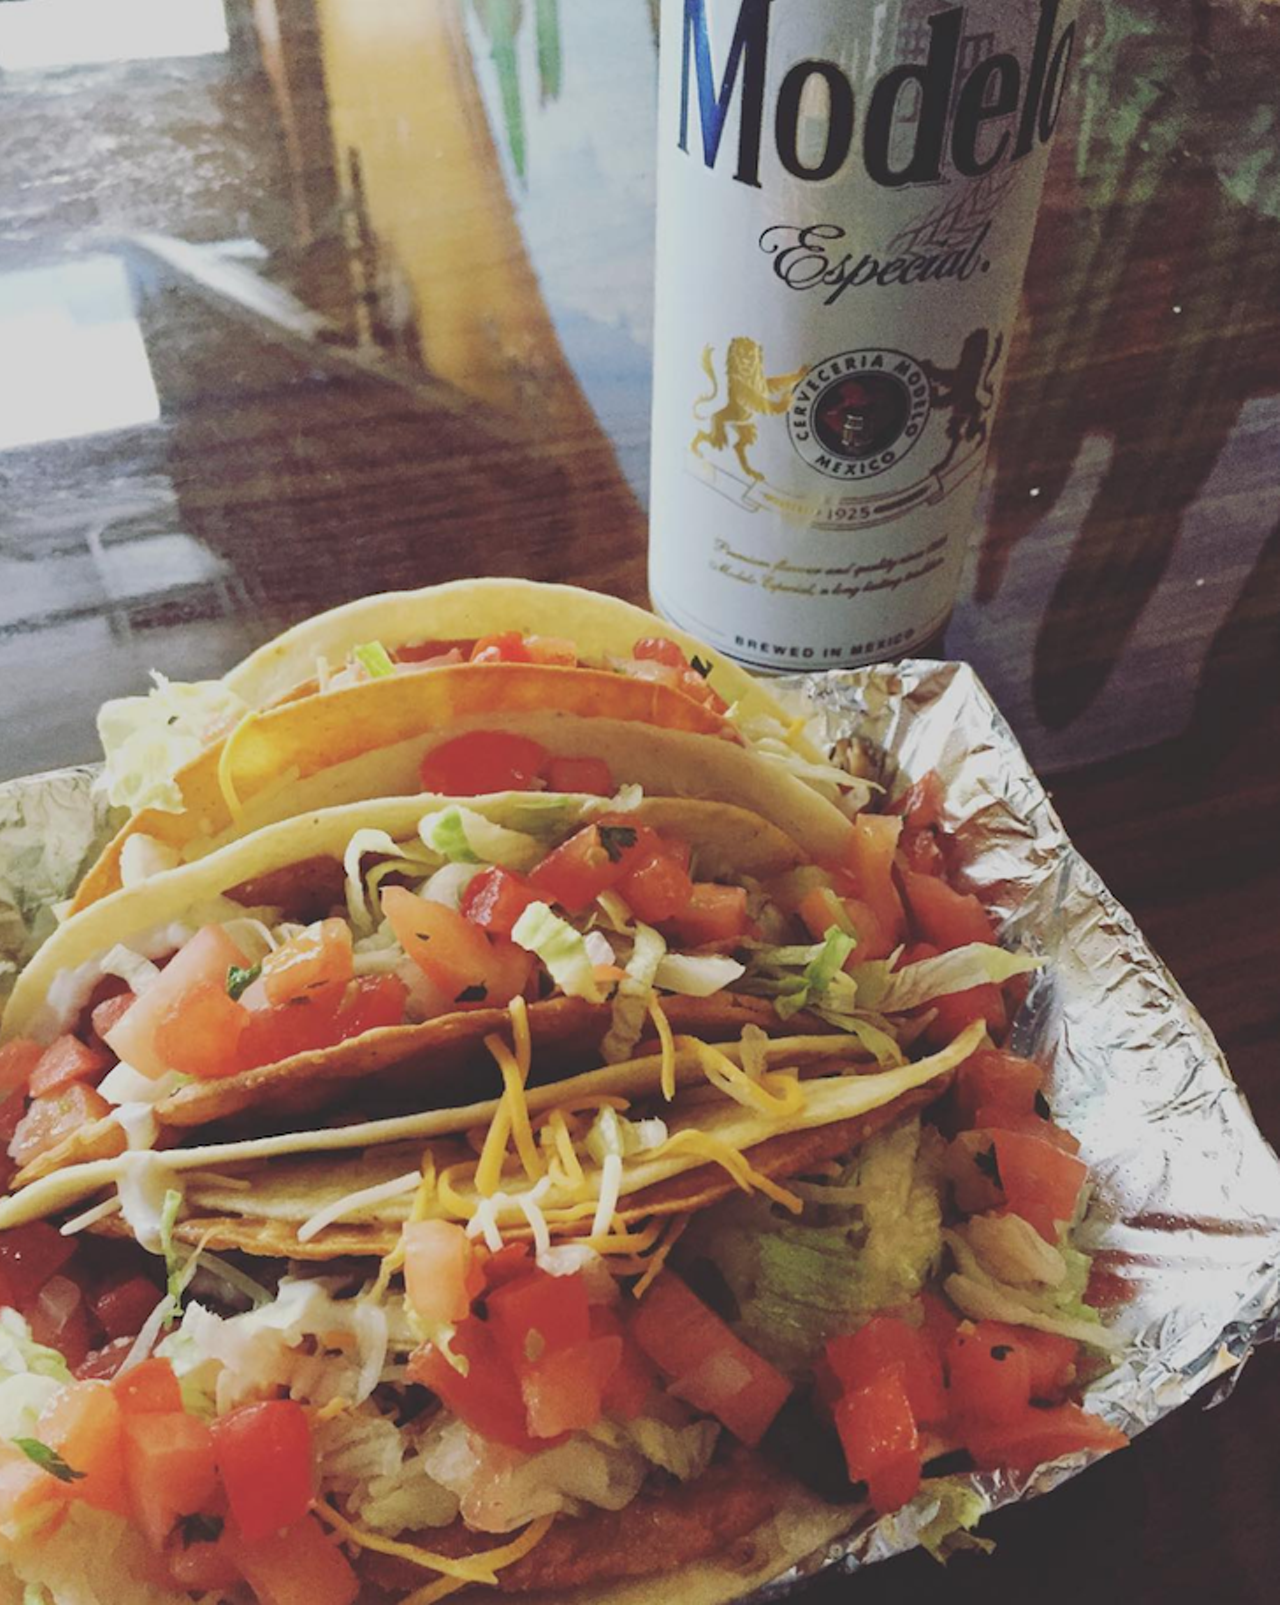 Gringos Locos
22 E. Washington St., 407-841-5626, also 2406 E. Robinson St., 407-896-5626
They've got street tacos, crunchy tacos, and the uber-popular Double Ds if you can't choose.
Photo via  tombofett/Instagram